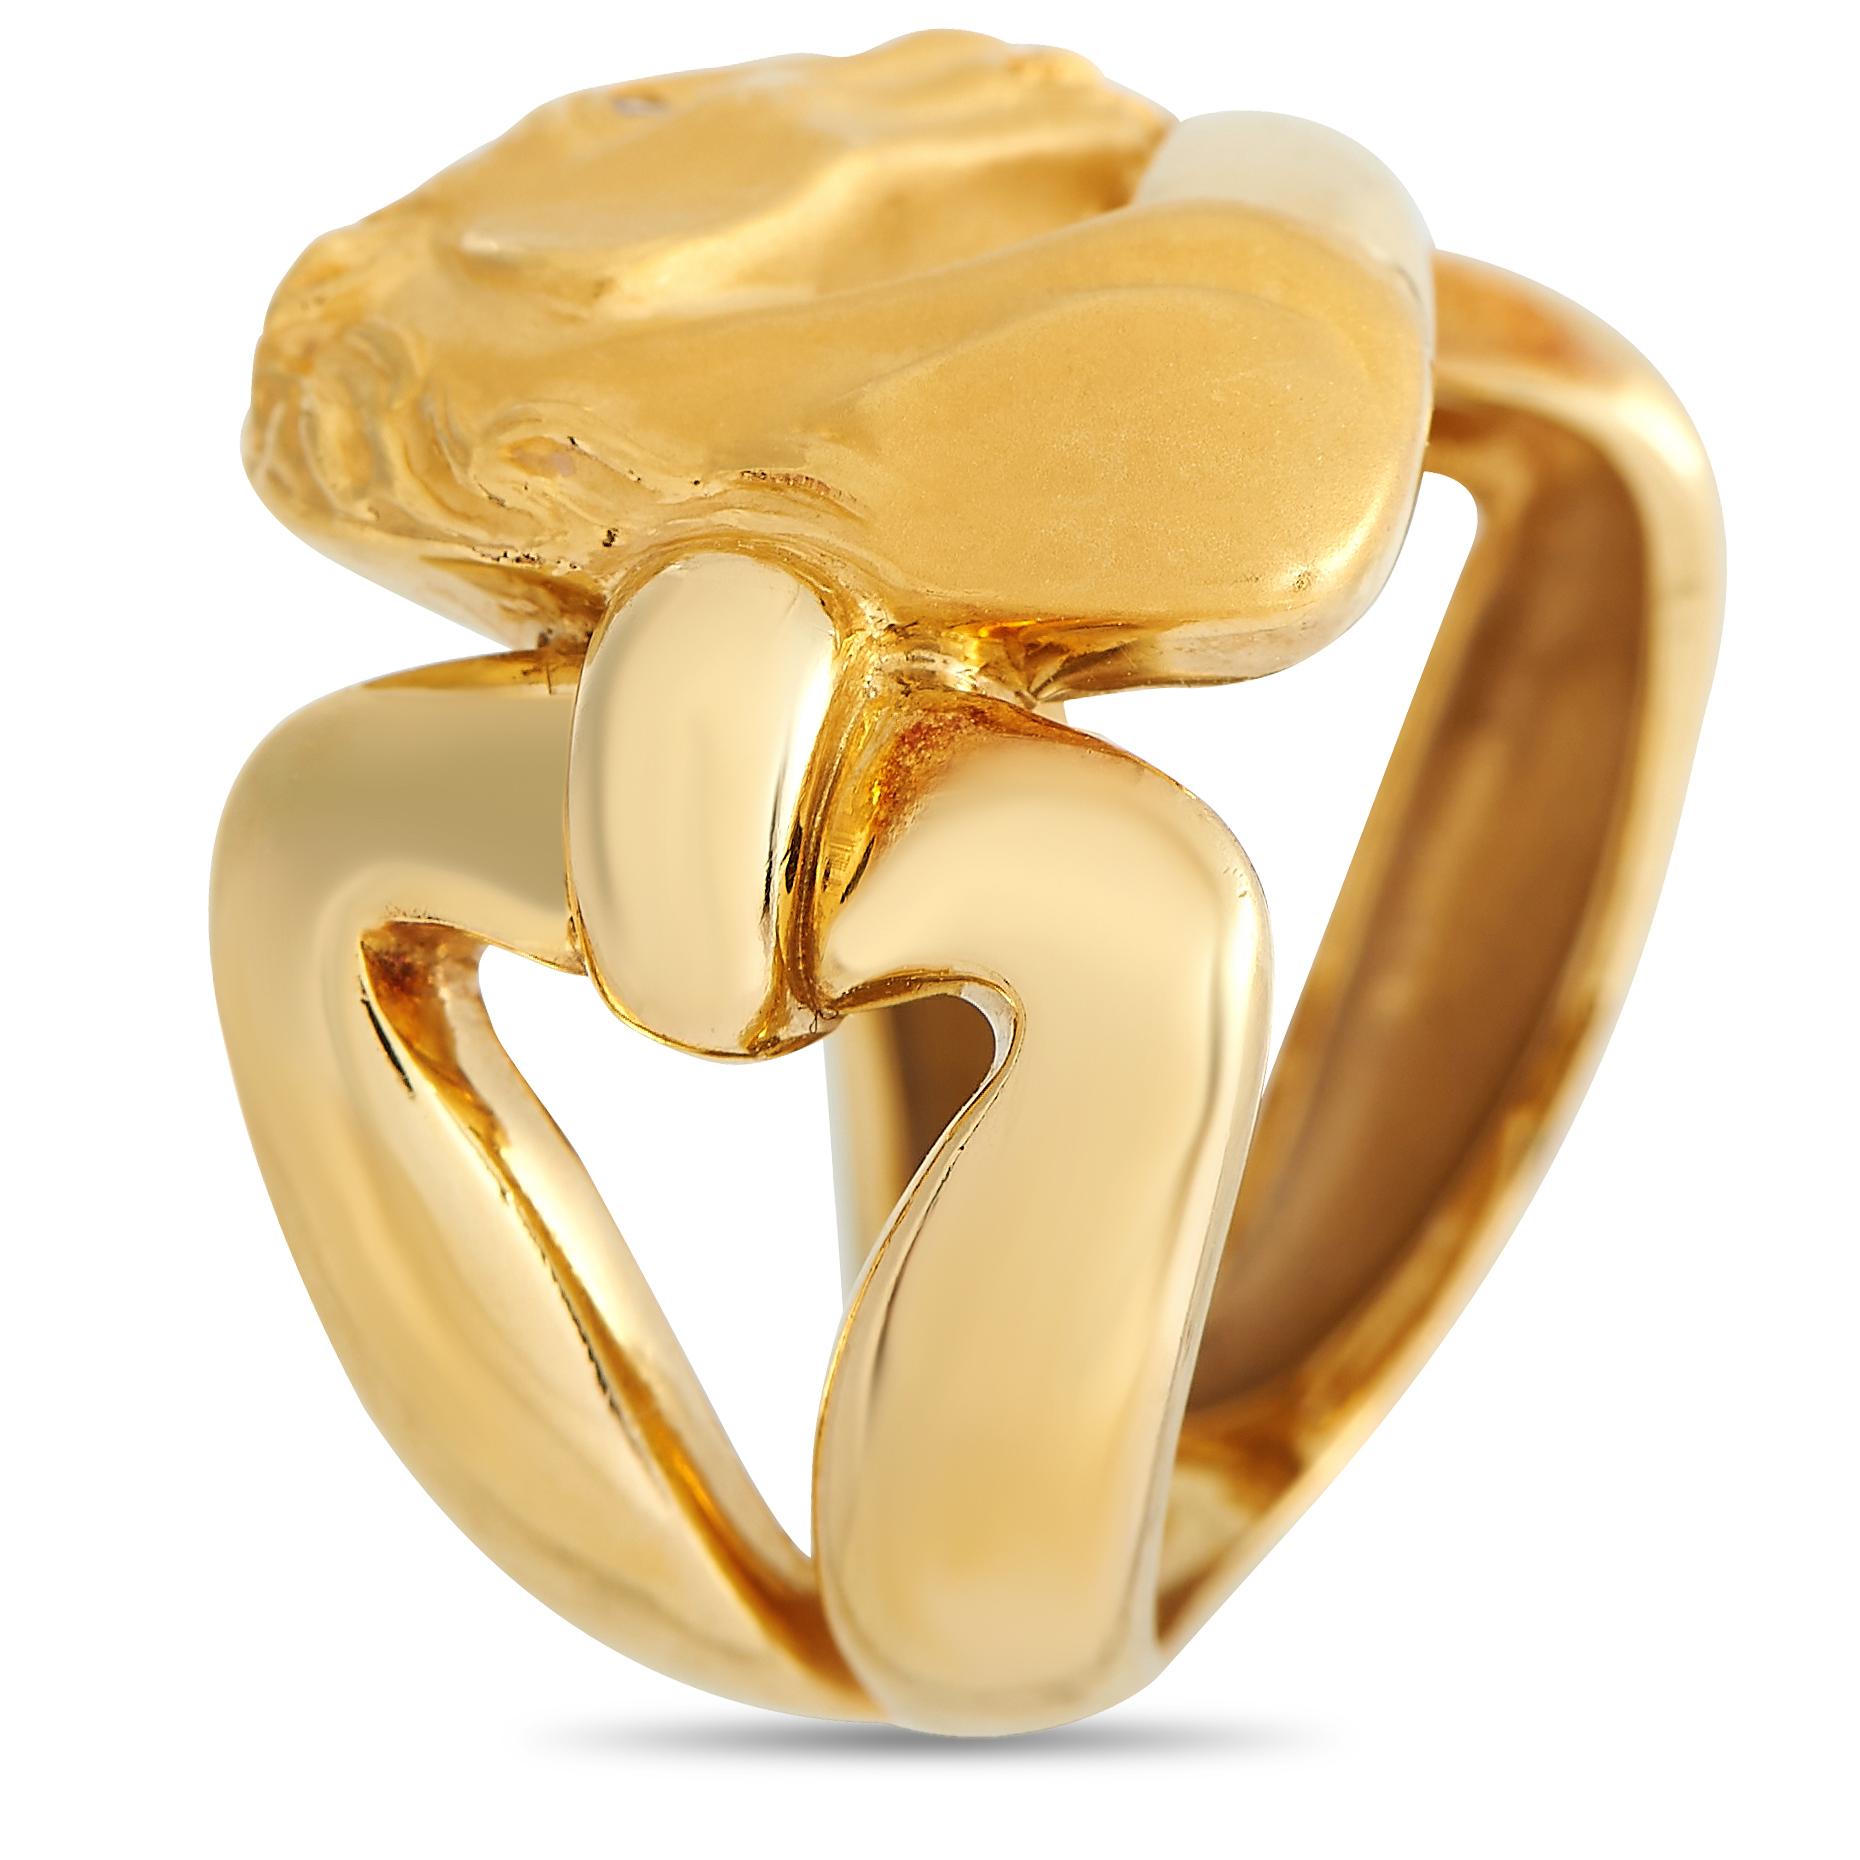 Infuse personality into your style with this Carrera y Carrera yellow gold ring with a sculpted horse motif. A symbol of strength, courage, and freedom, this stylized ring features a wide split shank detailed with a horsehead with a diamond eye. The